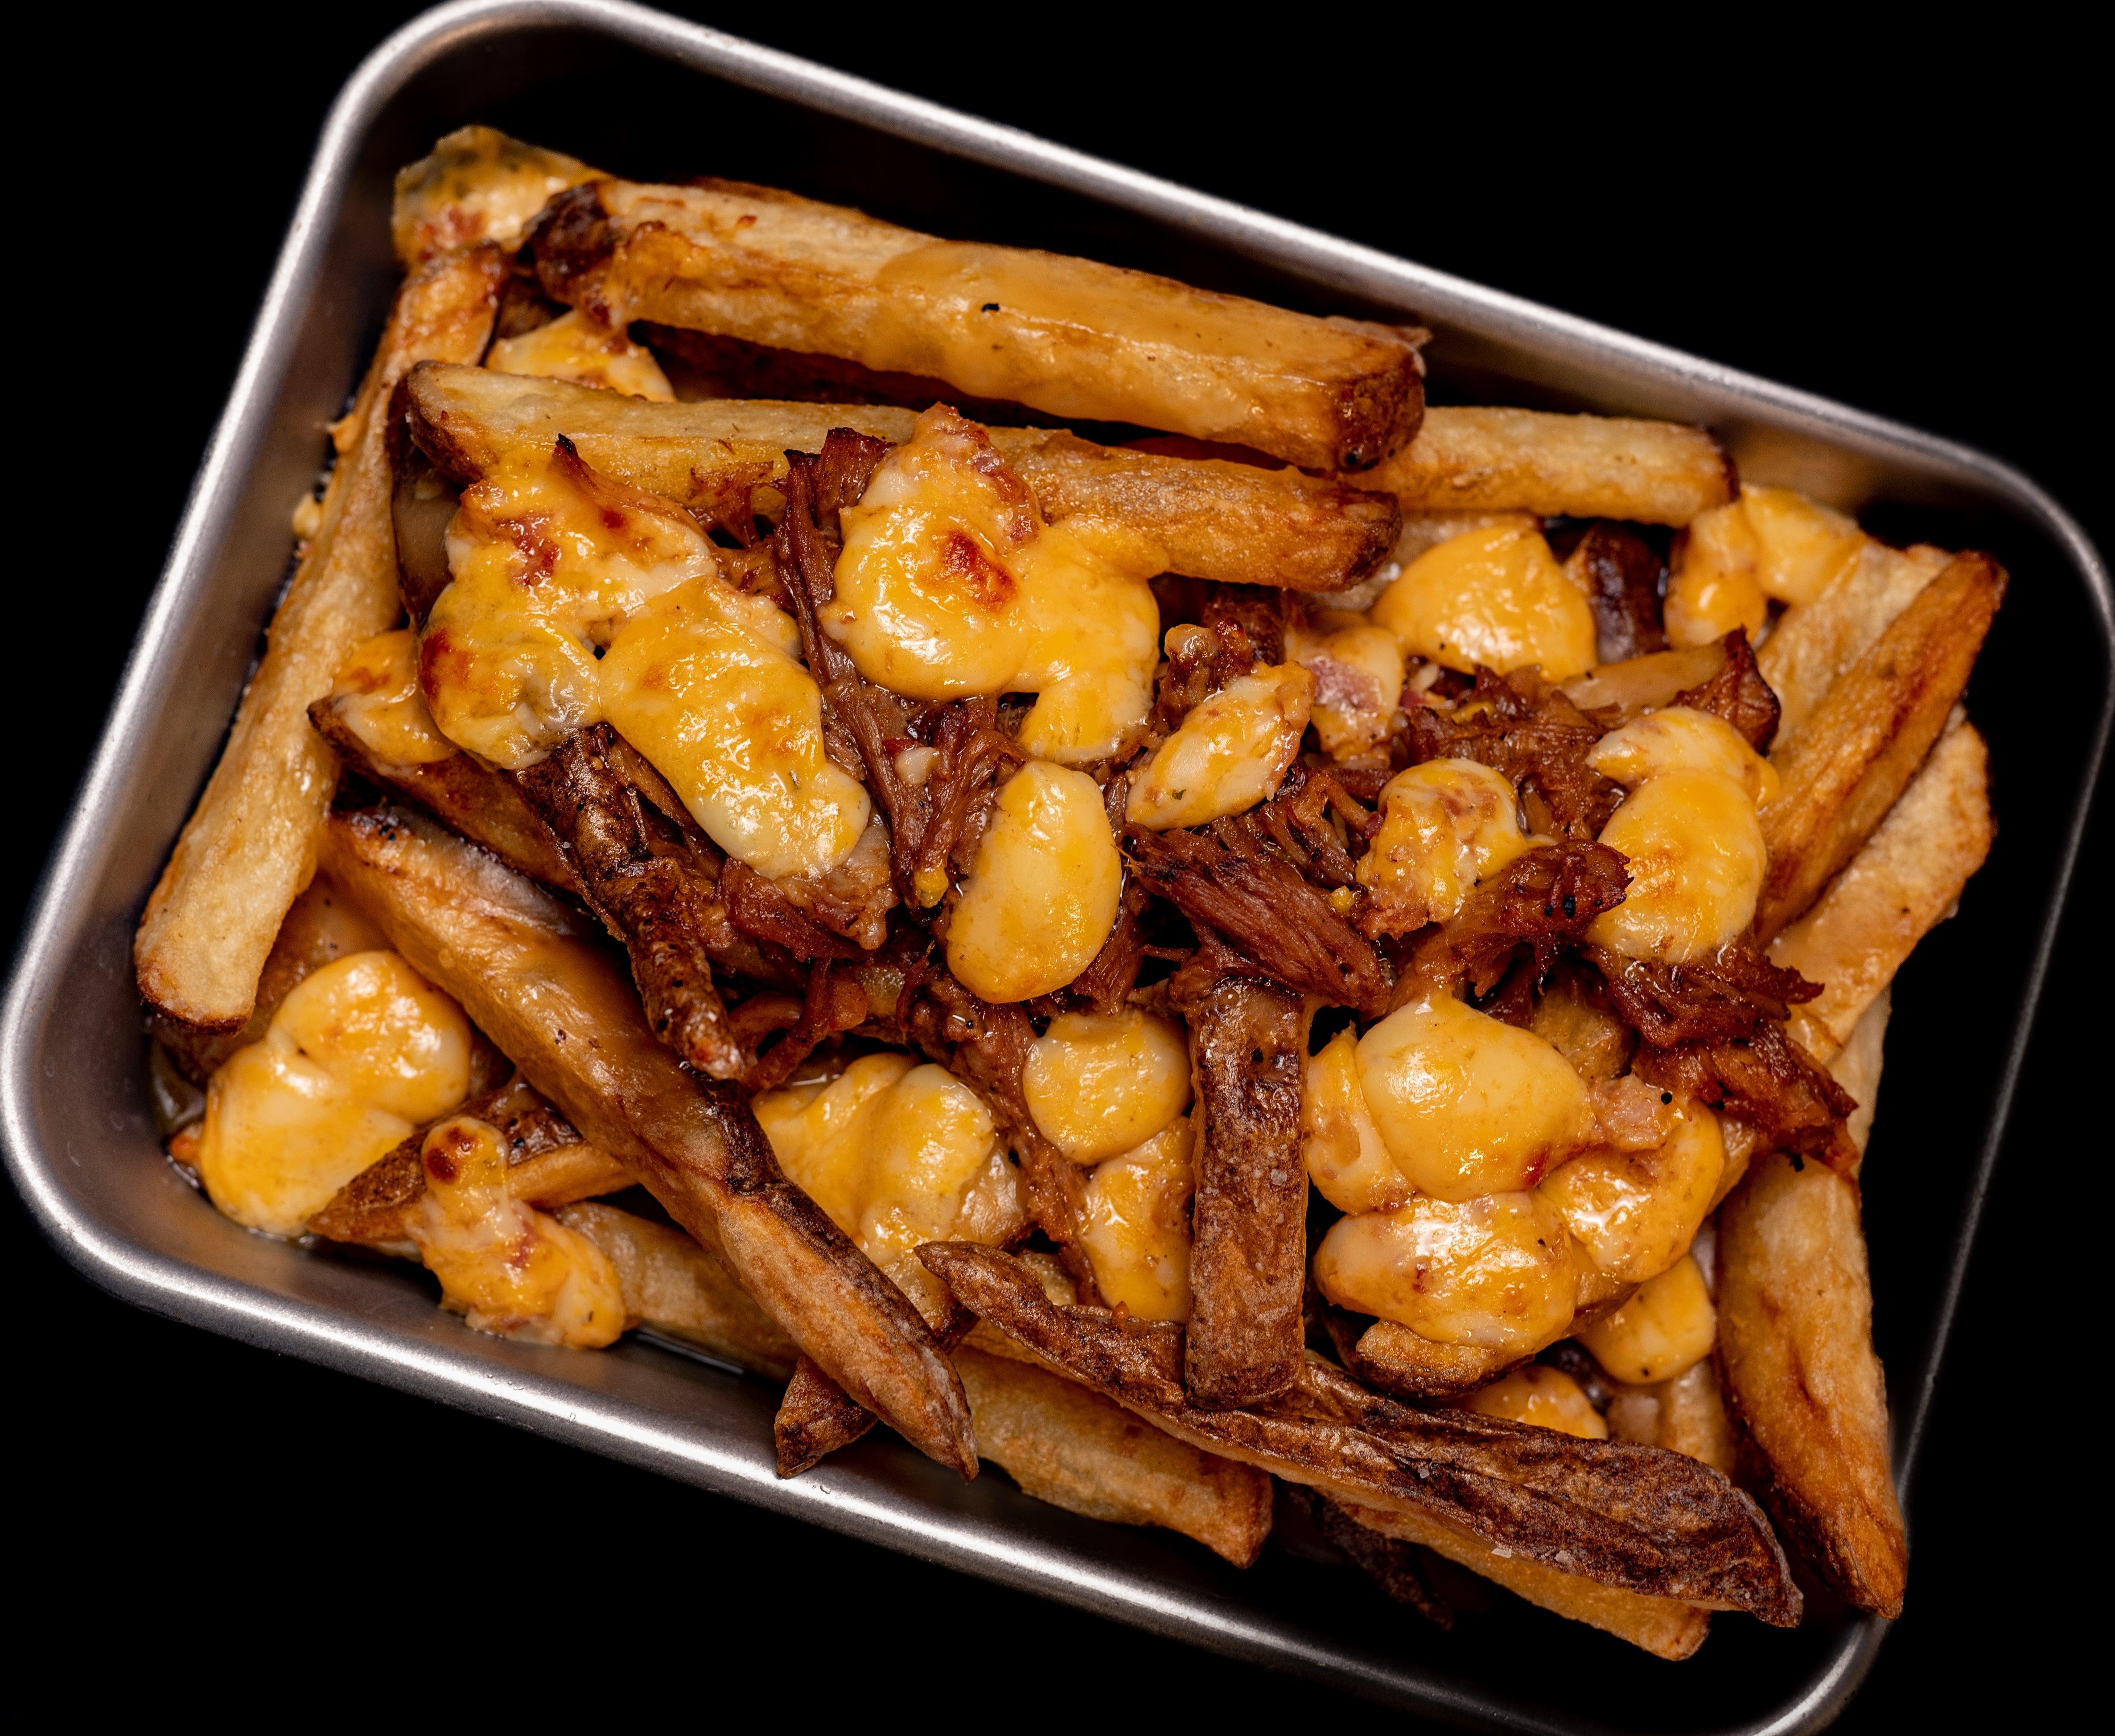 Delicious Habanero CheeseButta Loaded Pulled Pork French Fries - CheeseButta - Gourmet Products